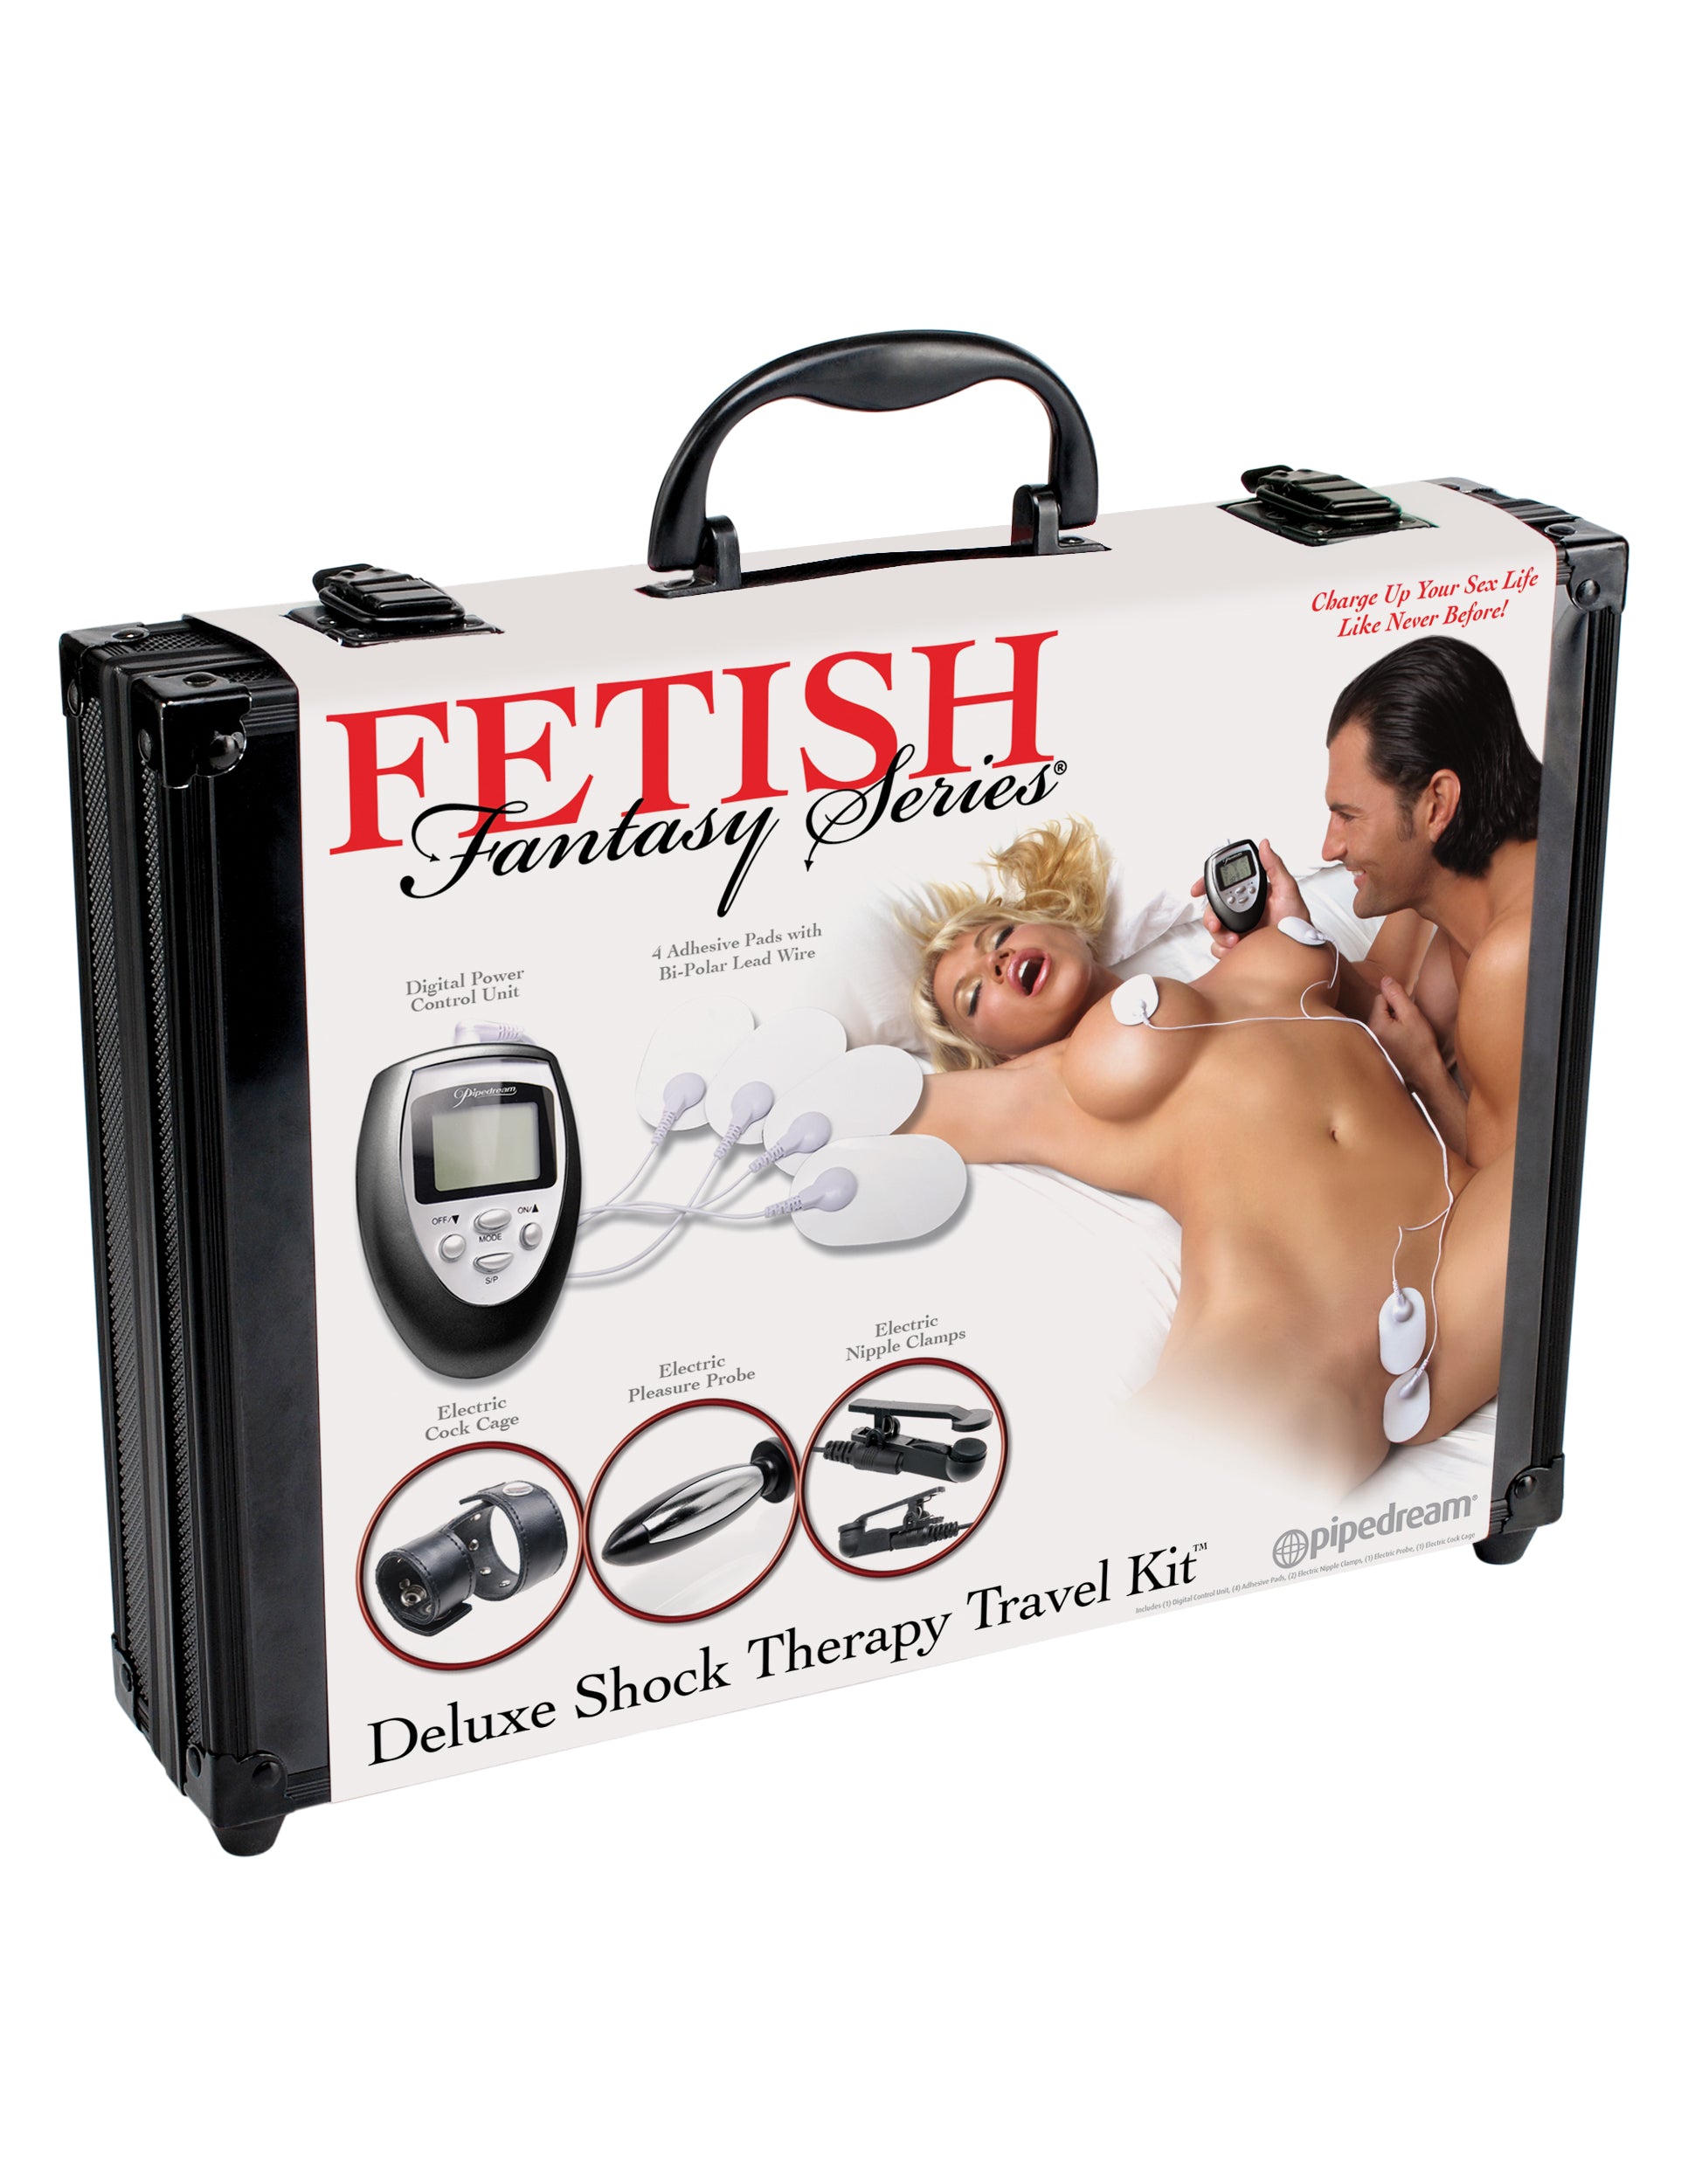 Fetish Fantasy Series Deluxe Shock Therapy  Travel Kit PD3723-05